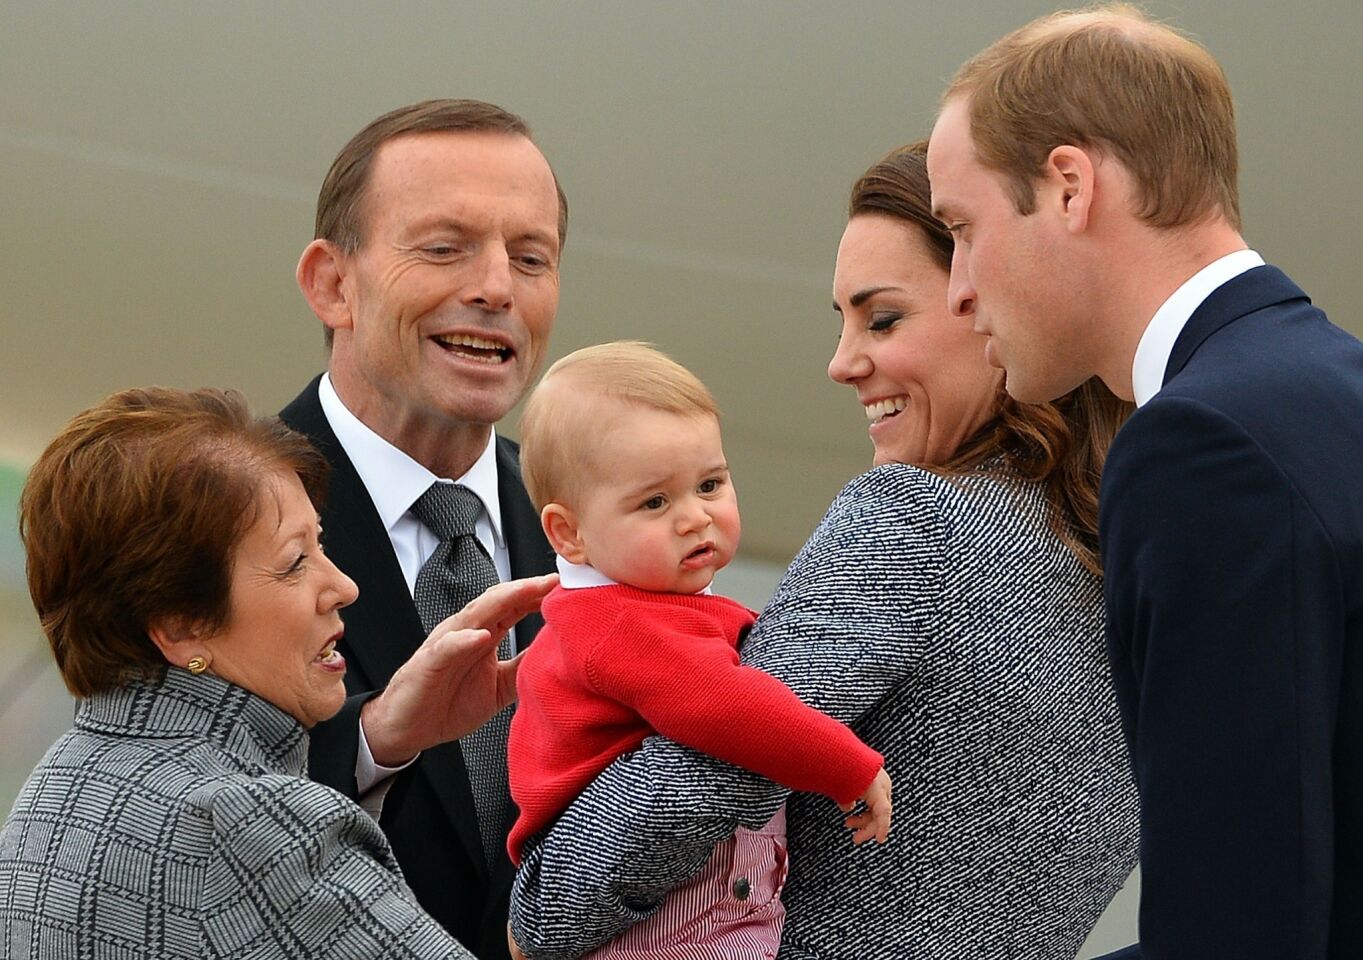 Lynne Cosgrove, left, wife of the governor-general of the Commonwealth of Australia, and Australian Prime Minister Tony Abbott see off Britain's Prince William, his wife, Catherine, and their son, Prince George, at the Defense Establishment Fairbairn in Canberra.